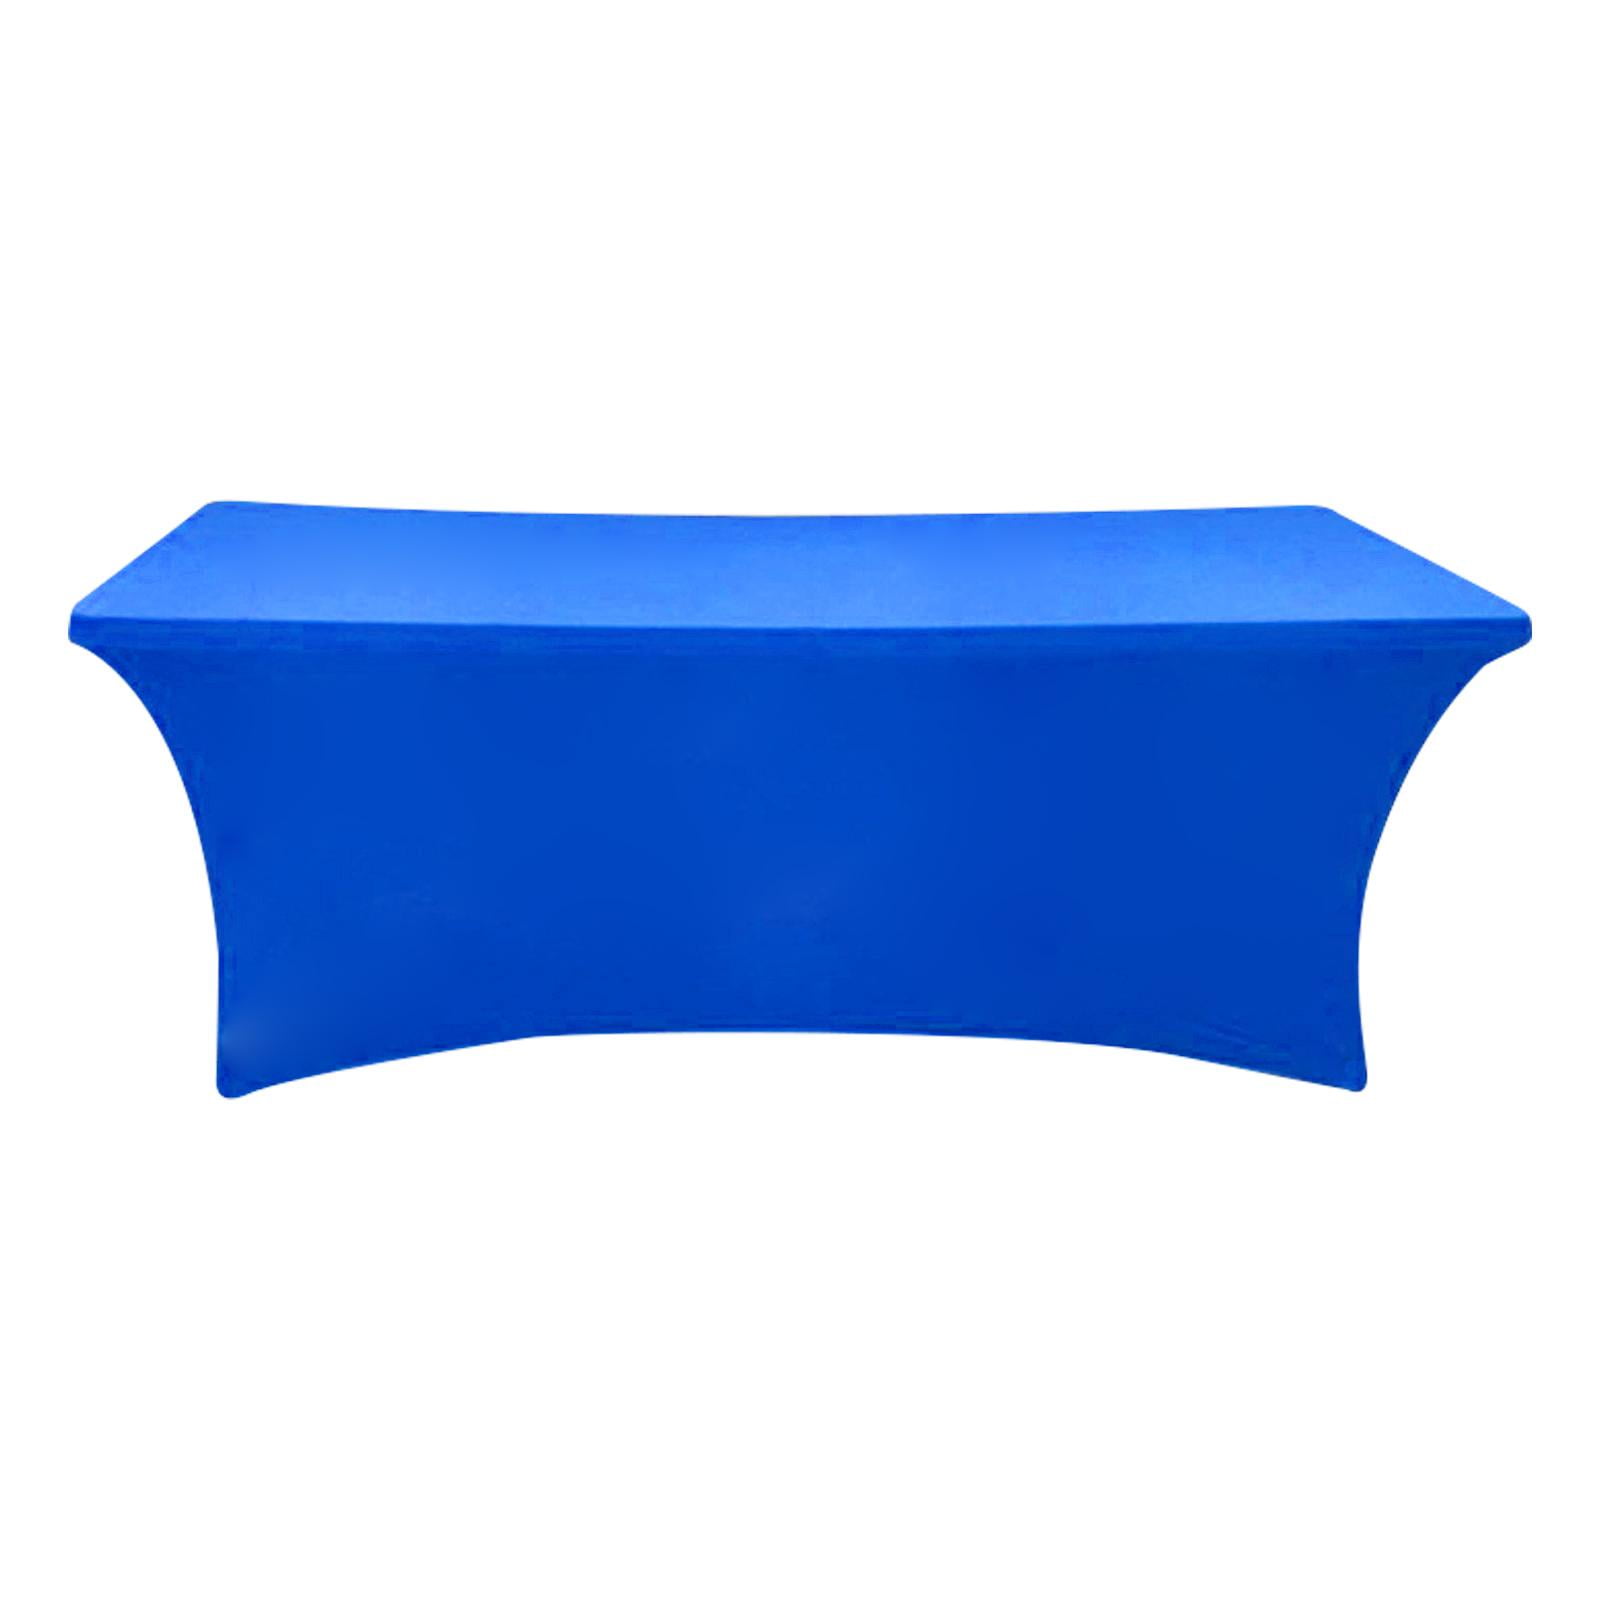 Royal Blue1.8m SPANDEX LYCRA EASY FIT TRESTLE TABLE COVER 